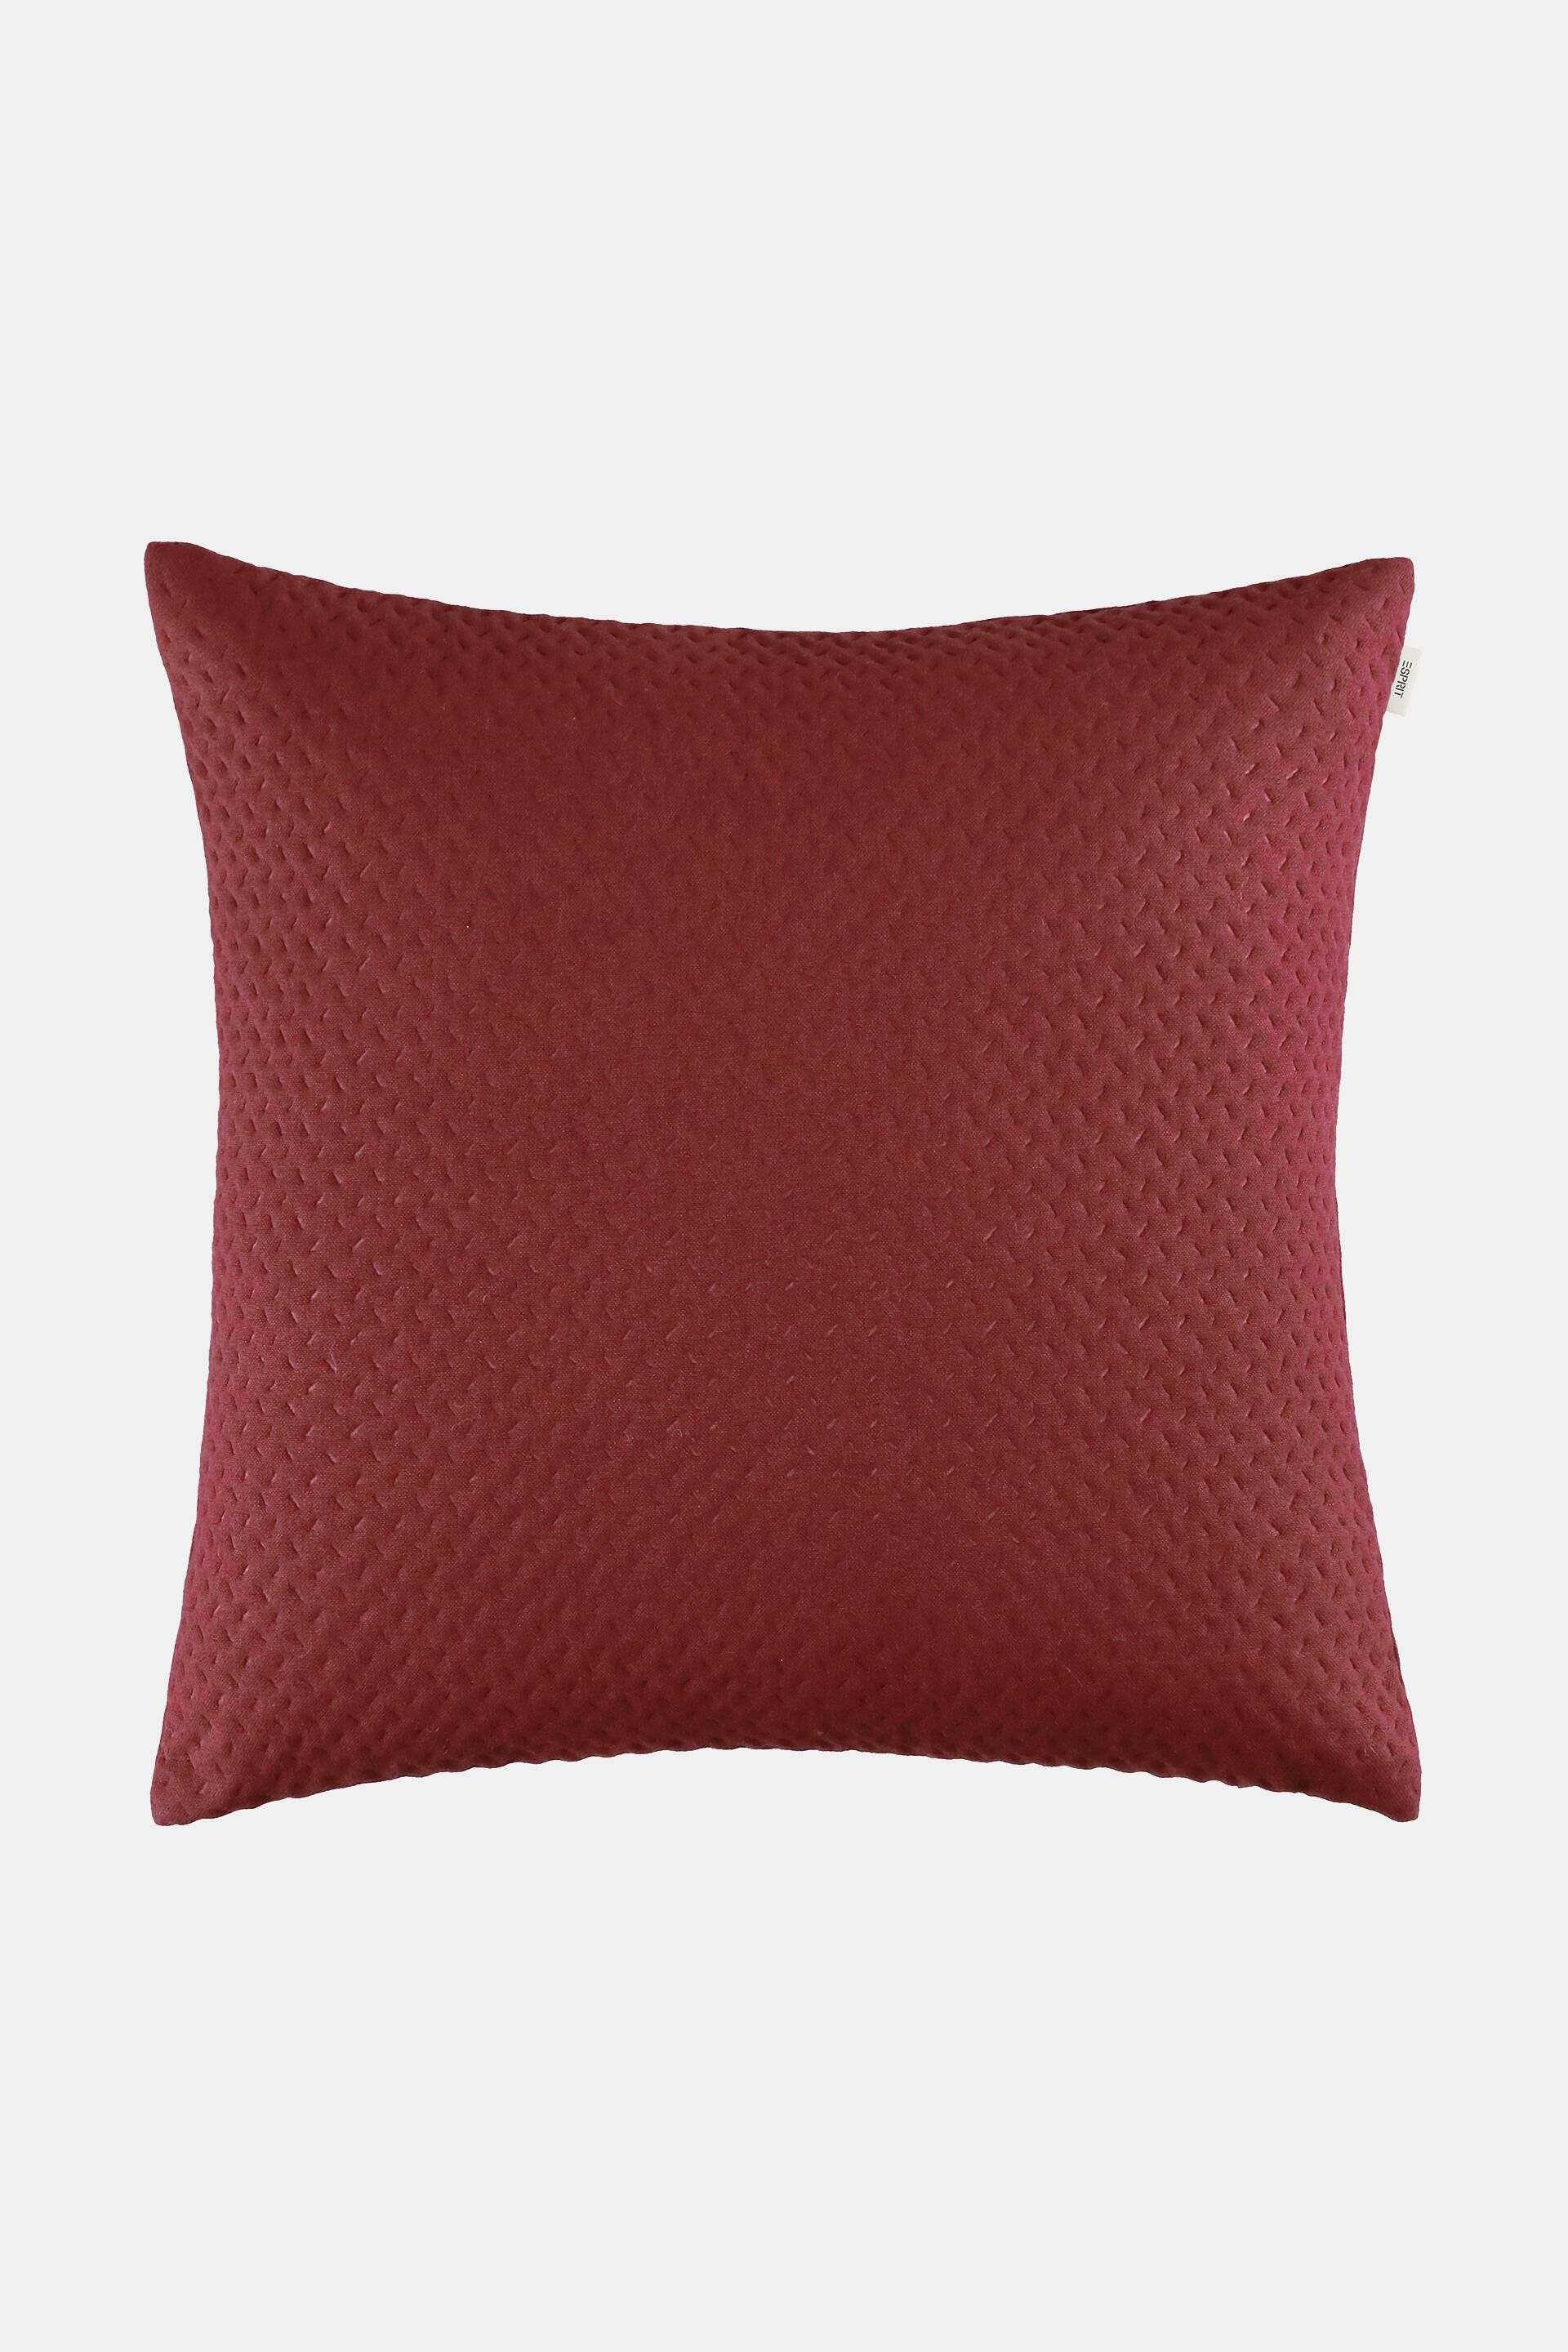 Esprit lounge Large, woven cushion cover